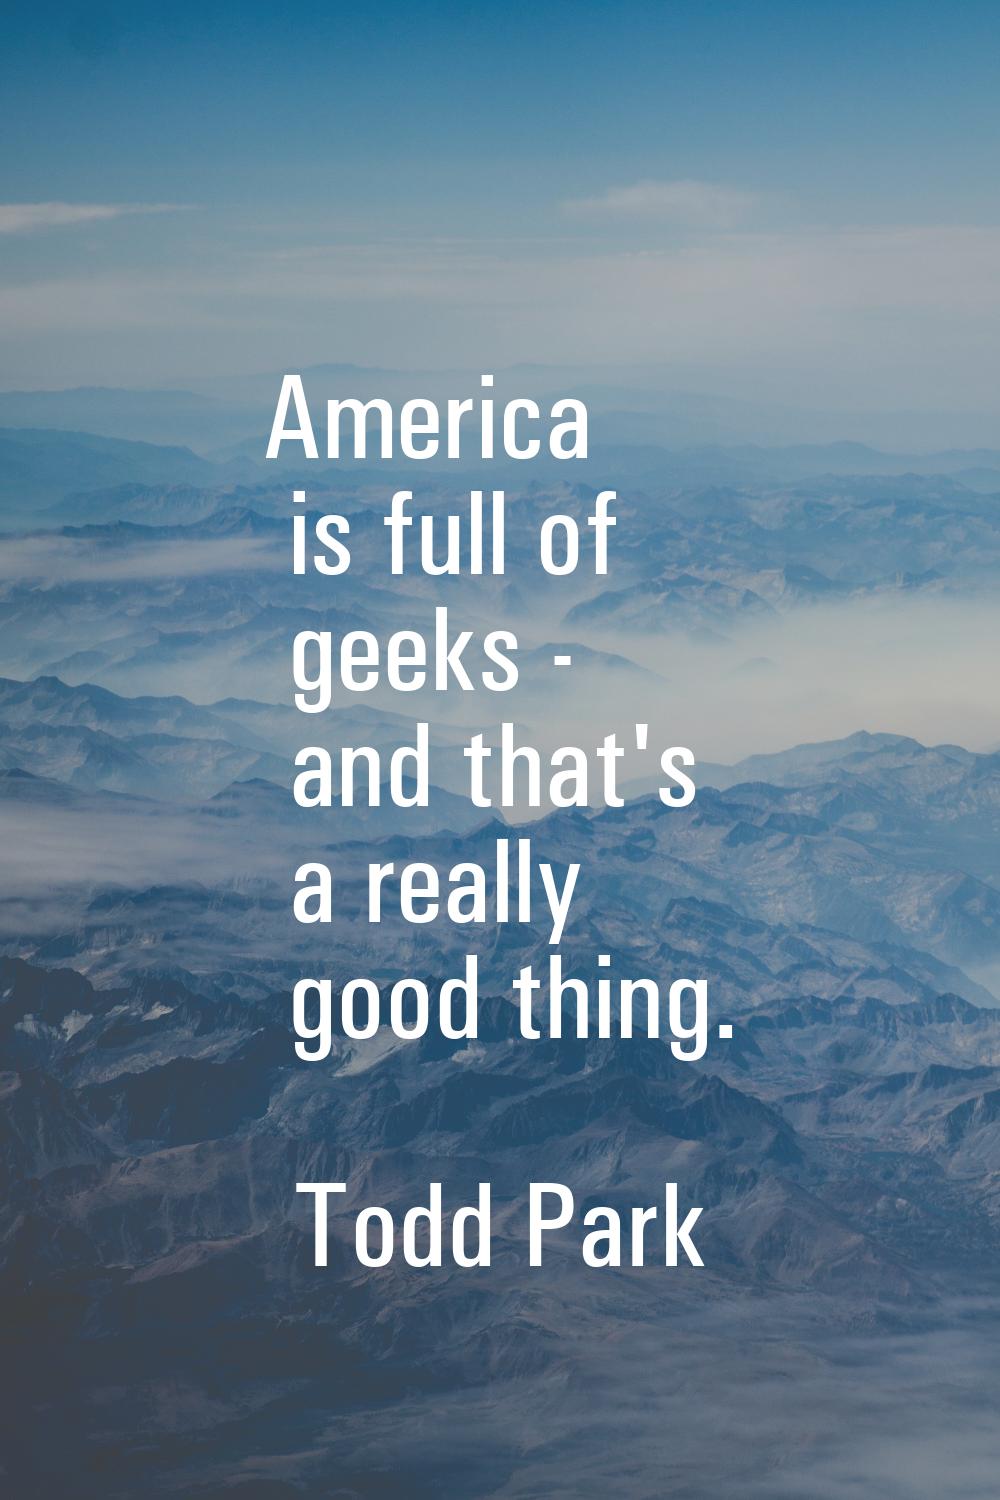 America is full of geeks - and that's a really good thing.